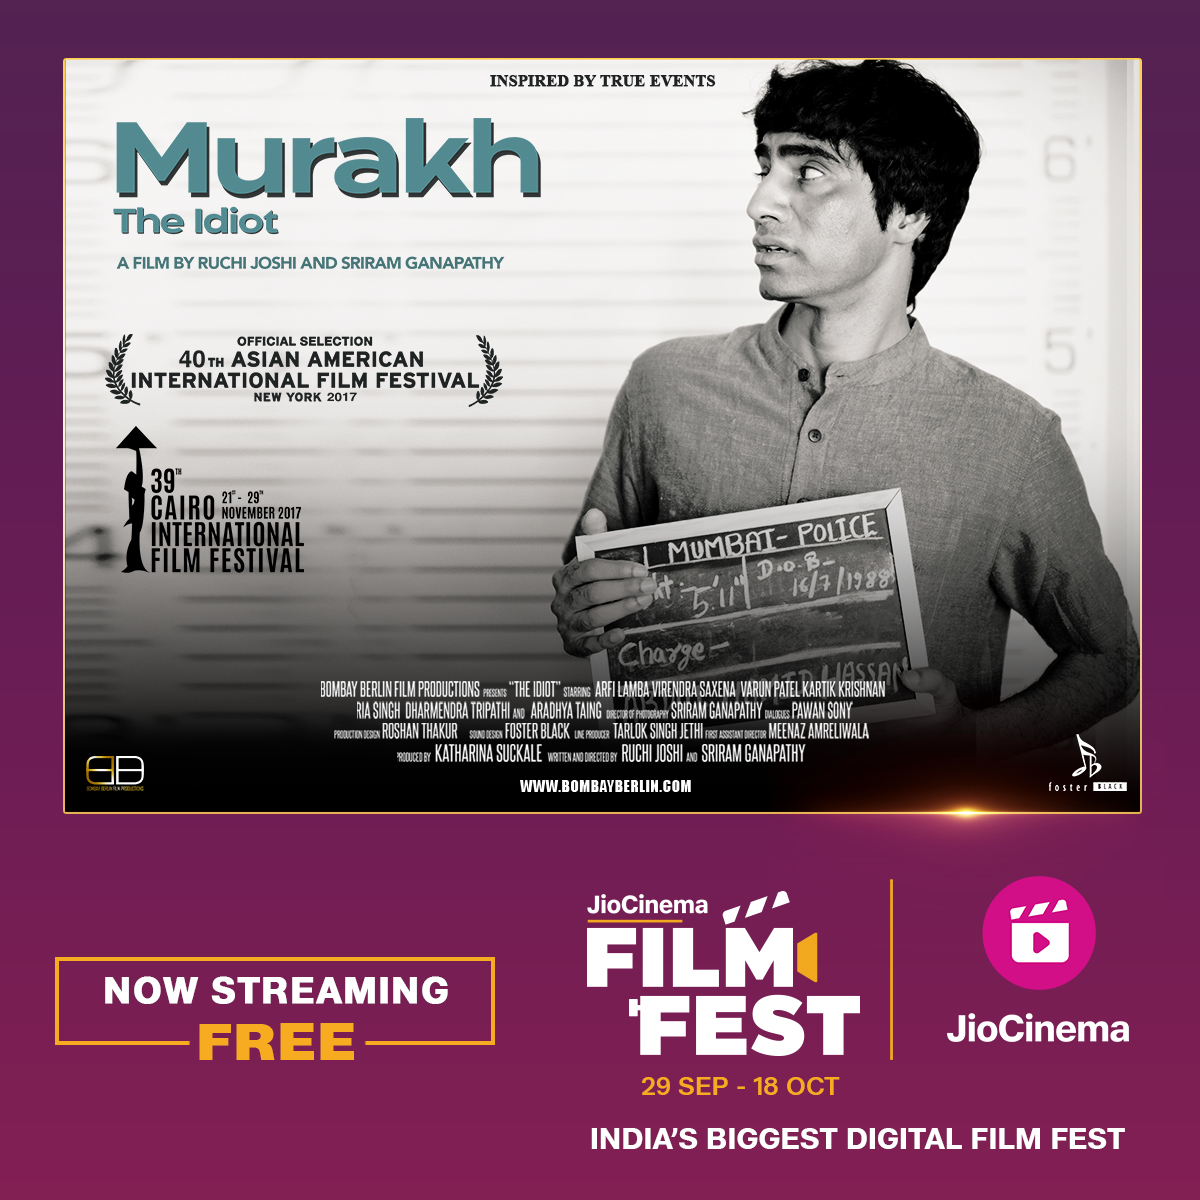 How you look at someone depends on you, not on them! Witness prejudices create chaos in 'Murakh (The Idiot)', starring Arfi Lamba and Virendra Saxena. Now steaming free at the #JioCinemaFilmFest. @virendrasaxena @arfilaamba @KatharinaSuckal @ruchisjoshi @Sriram_DoP